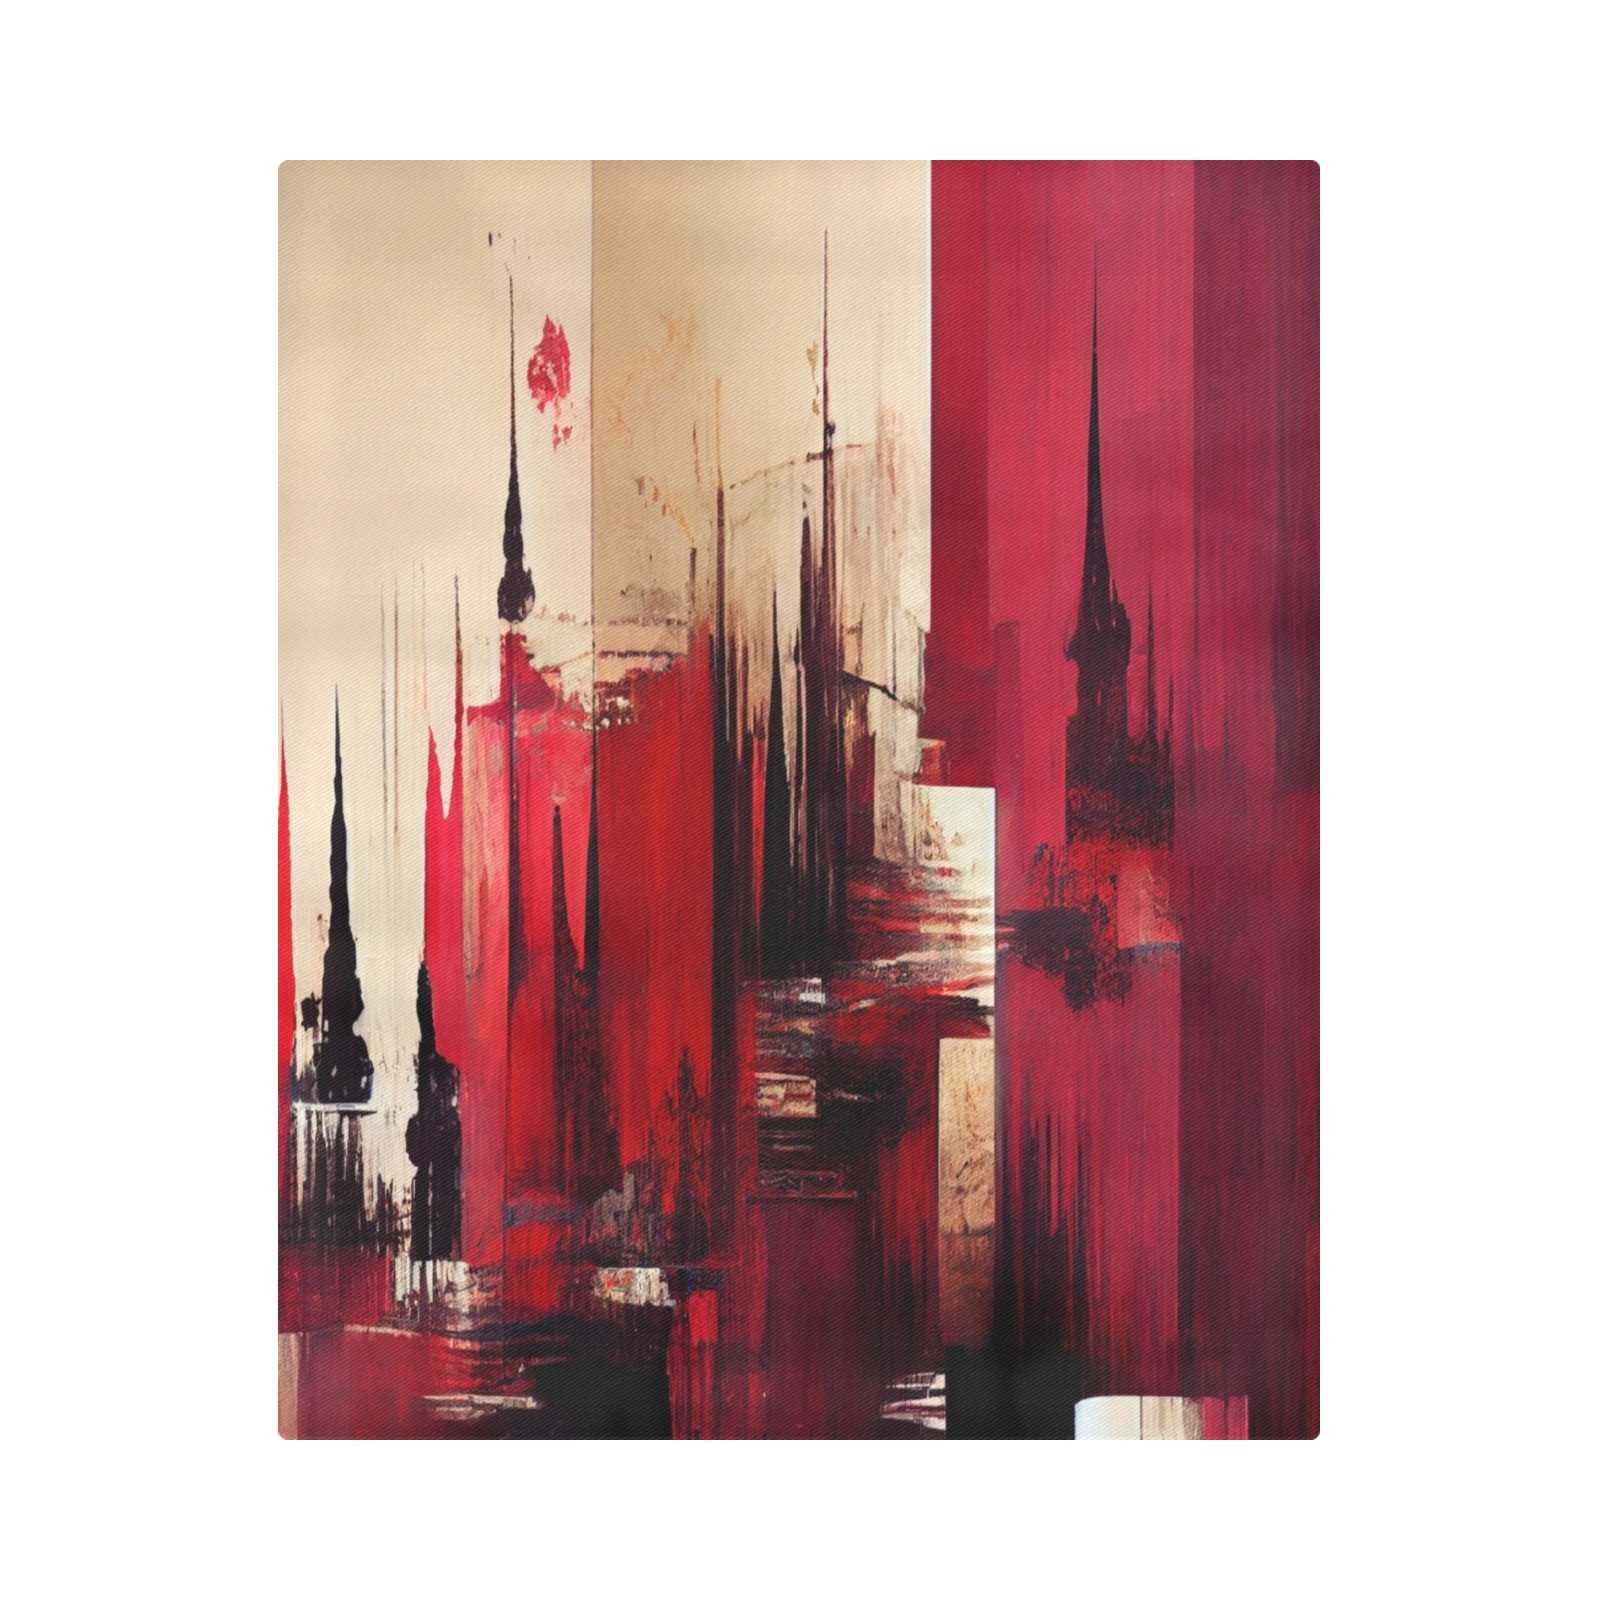 graffiti buildings red and cream 1 Duvet Cover 86"x70" ( All-over-print)